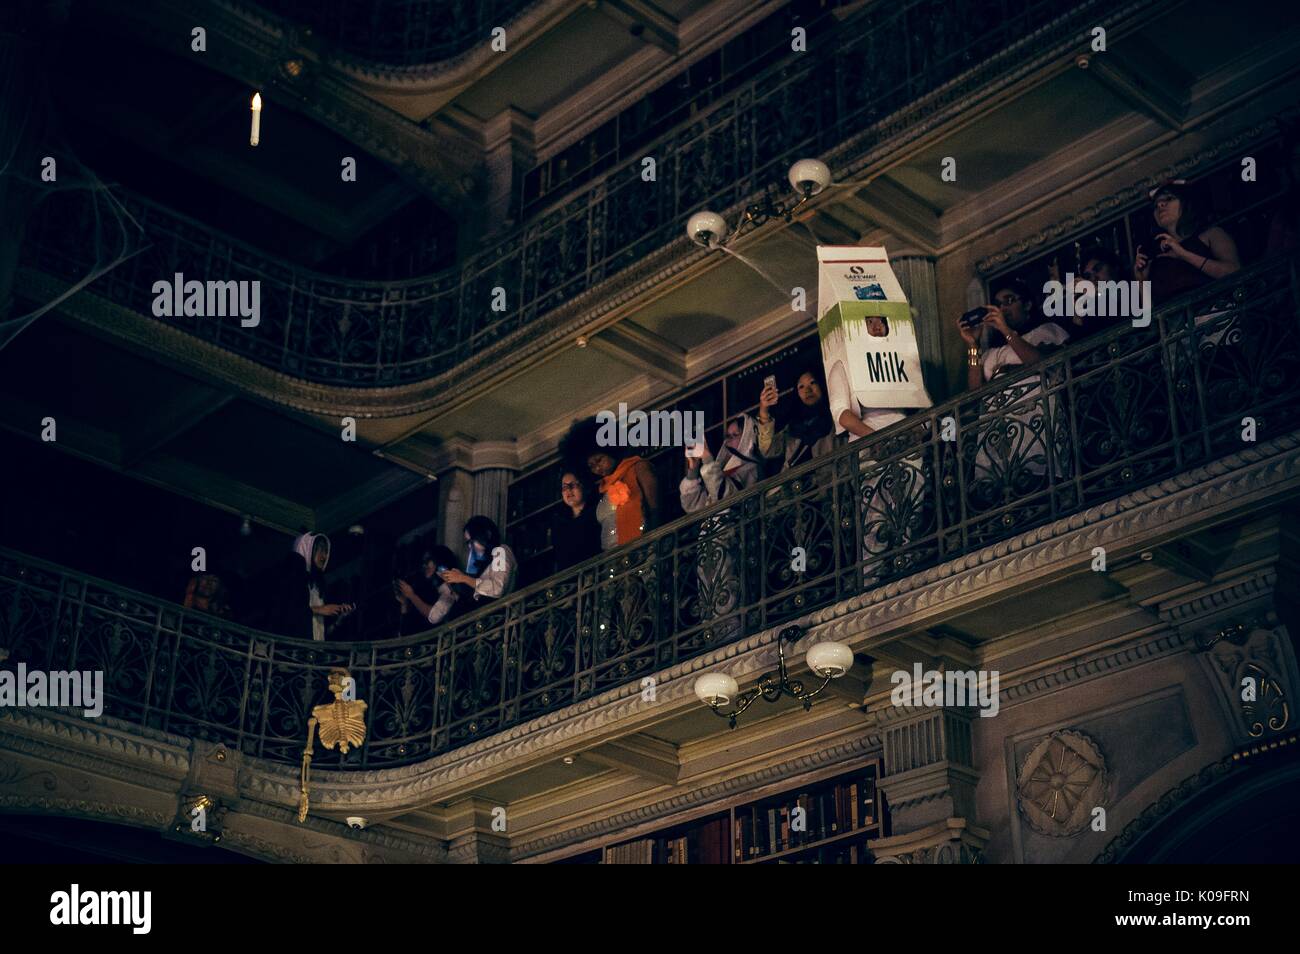 View of one of the upper-level floors of the Peabody Library, college students are standing looking down below and one student is dressed as a large milk carton, 2015. Courtesy Eric Chen. Stock Photo